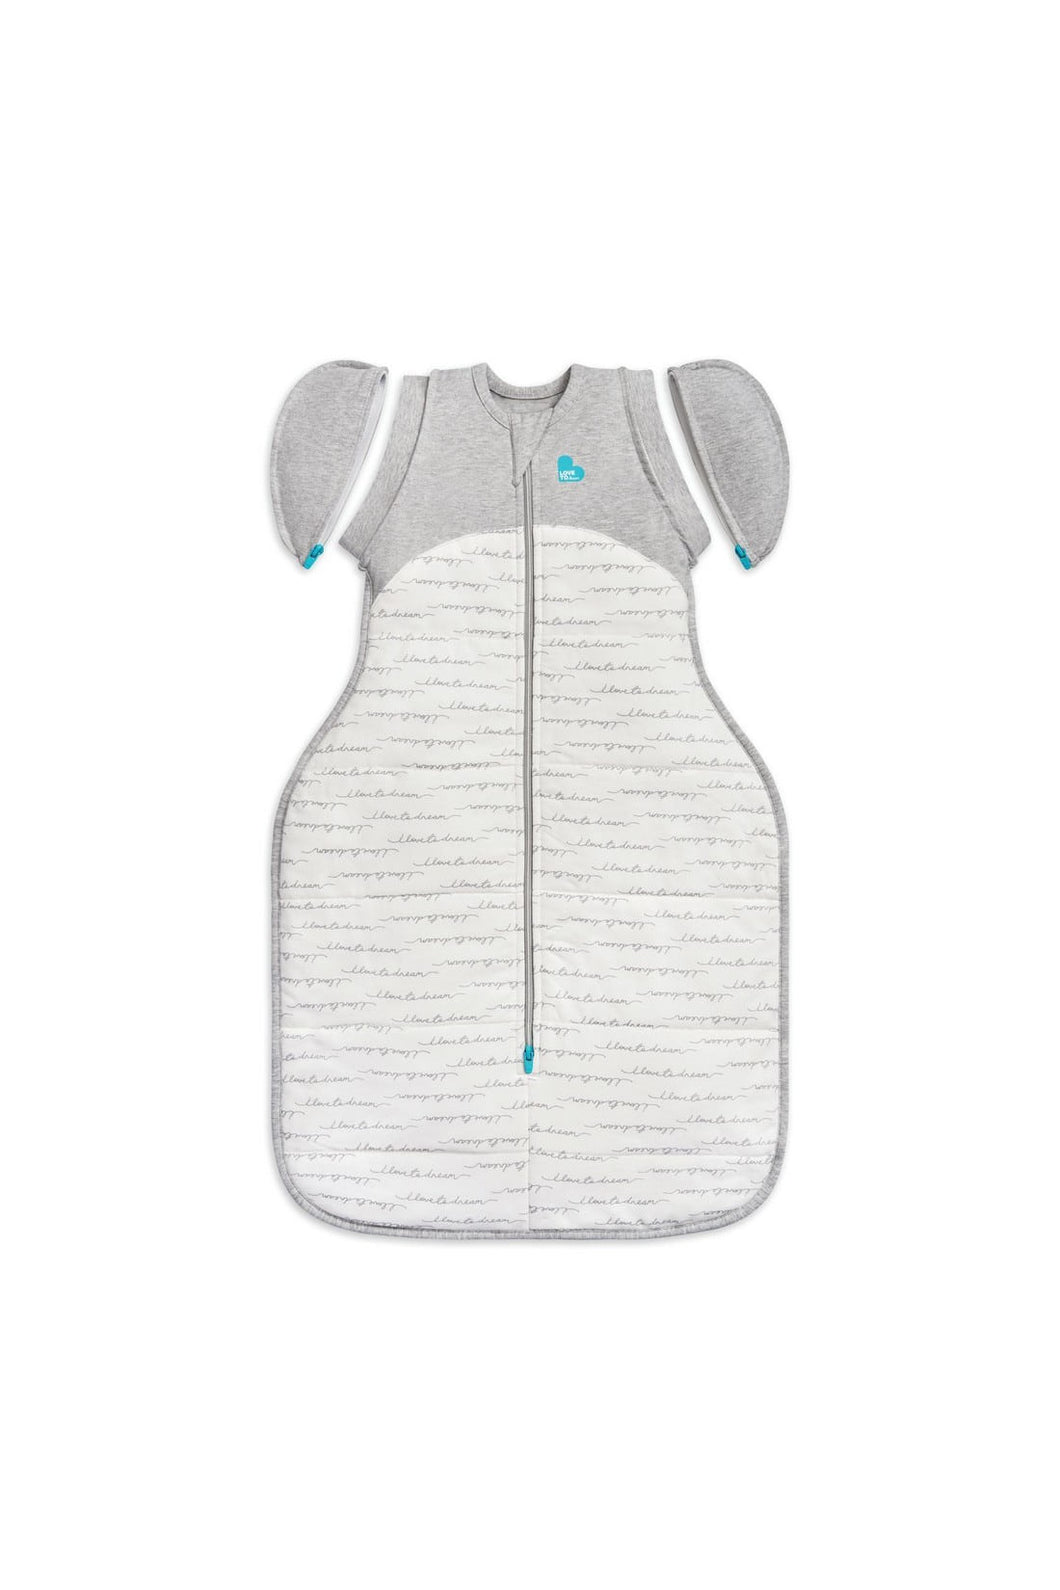 Love To Dream Swaddle UP Transition Bag Warm Dreamer White 2